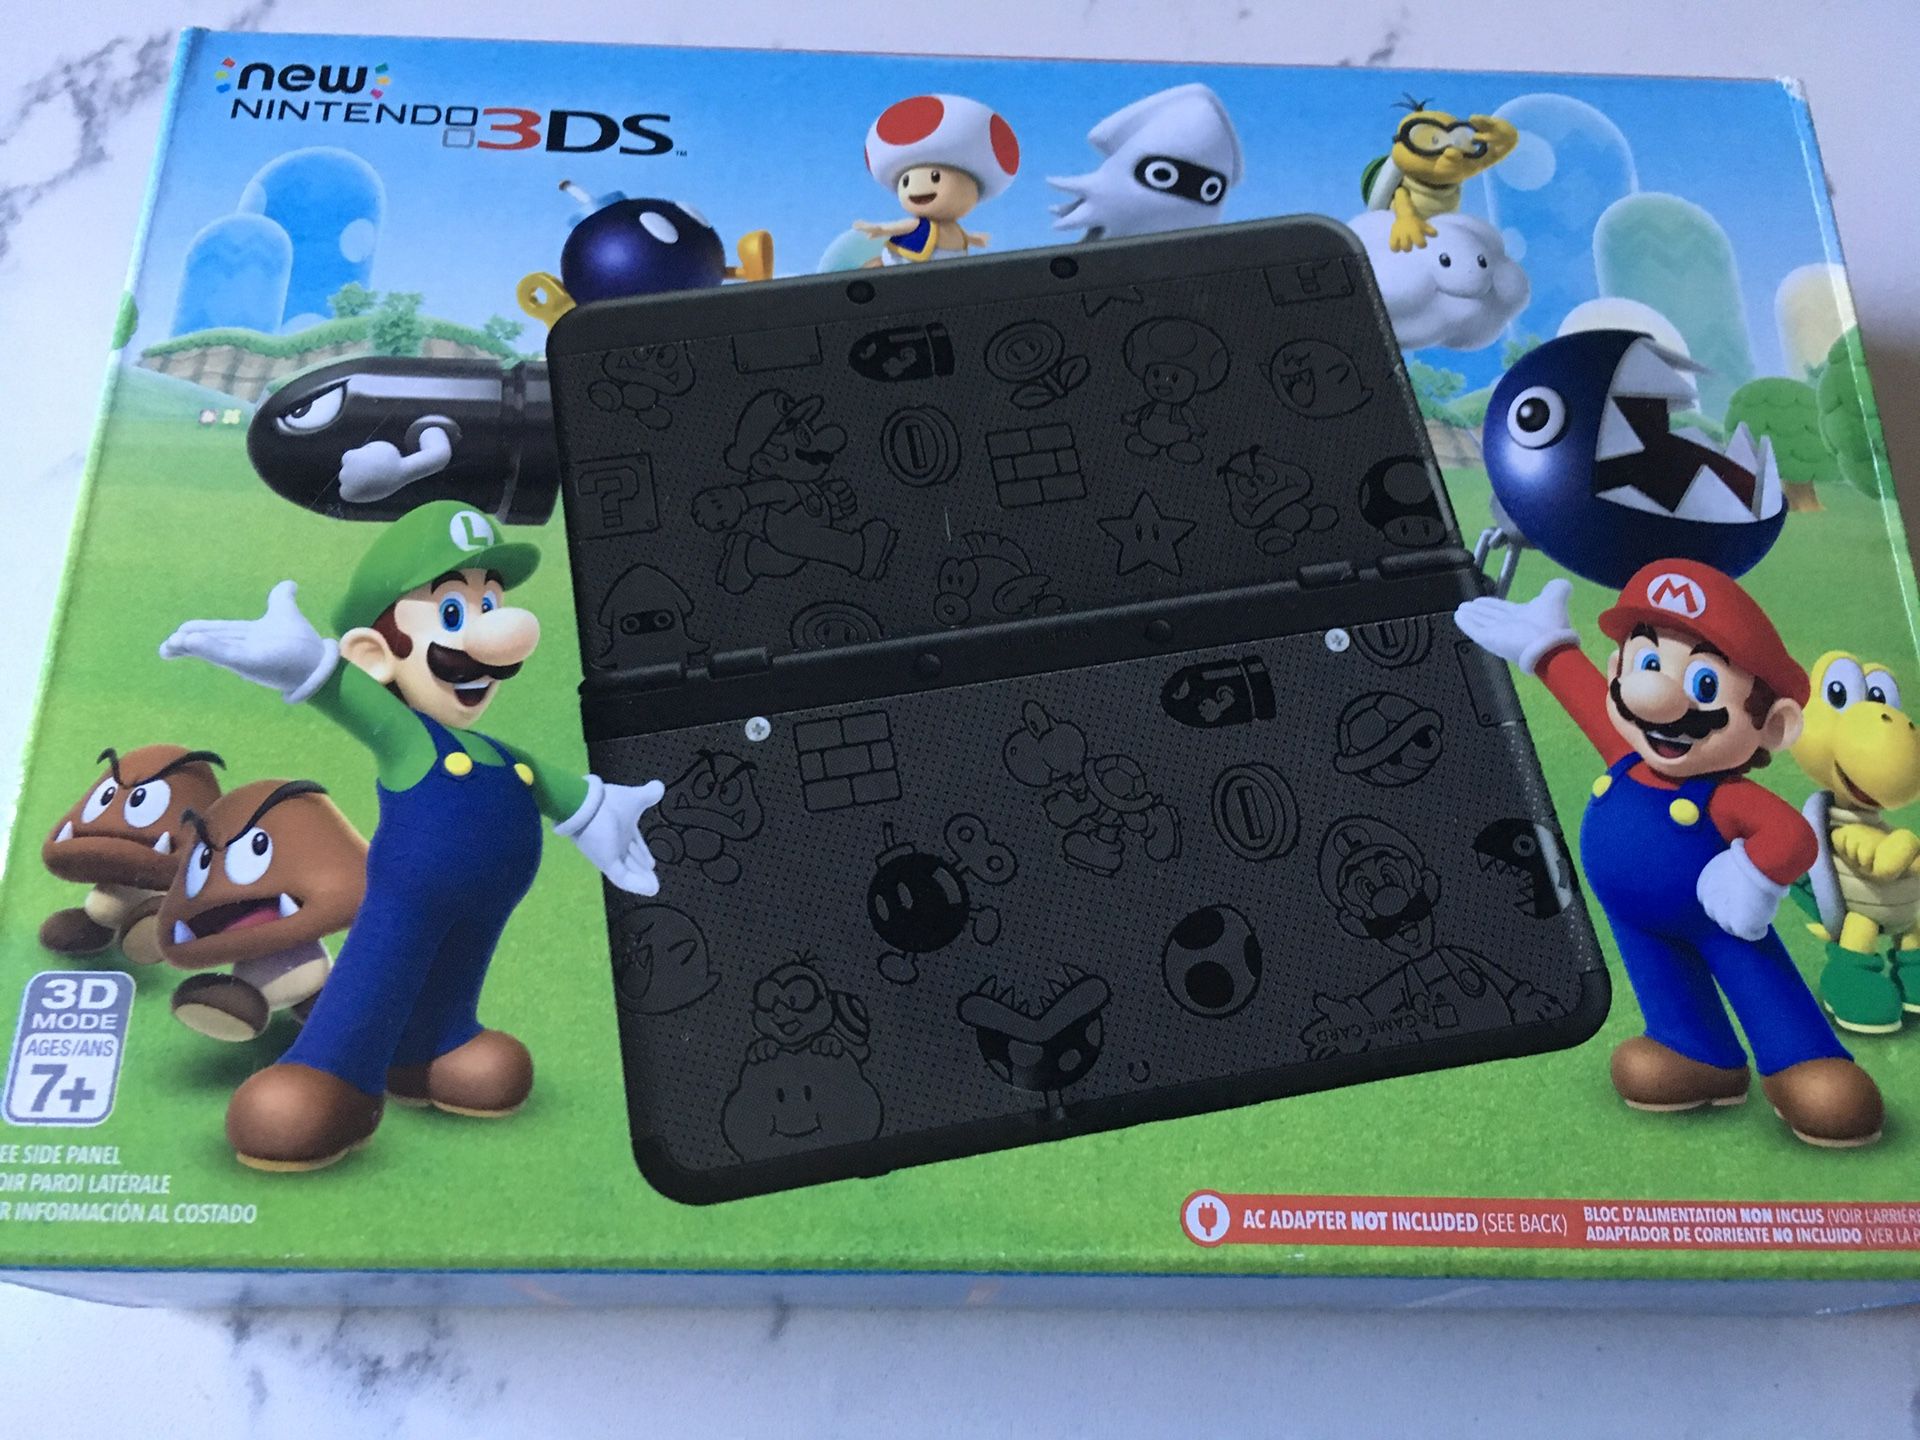 Super Mario black 3ds special edition adult owned